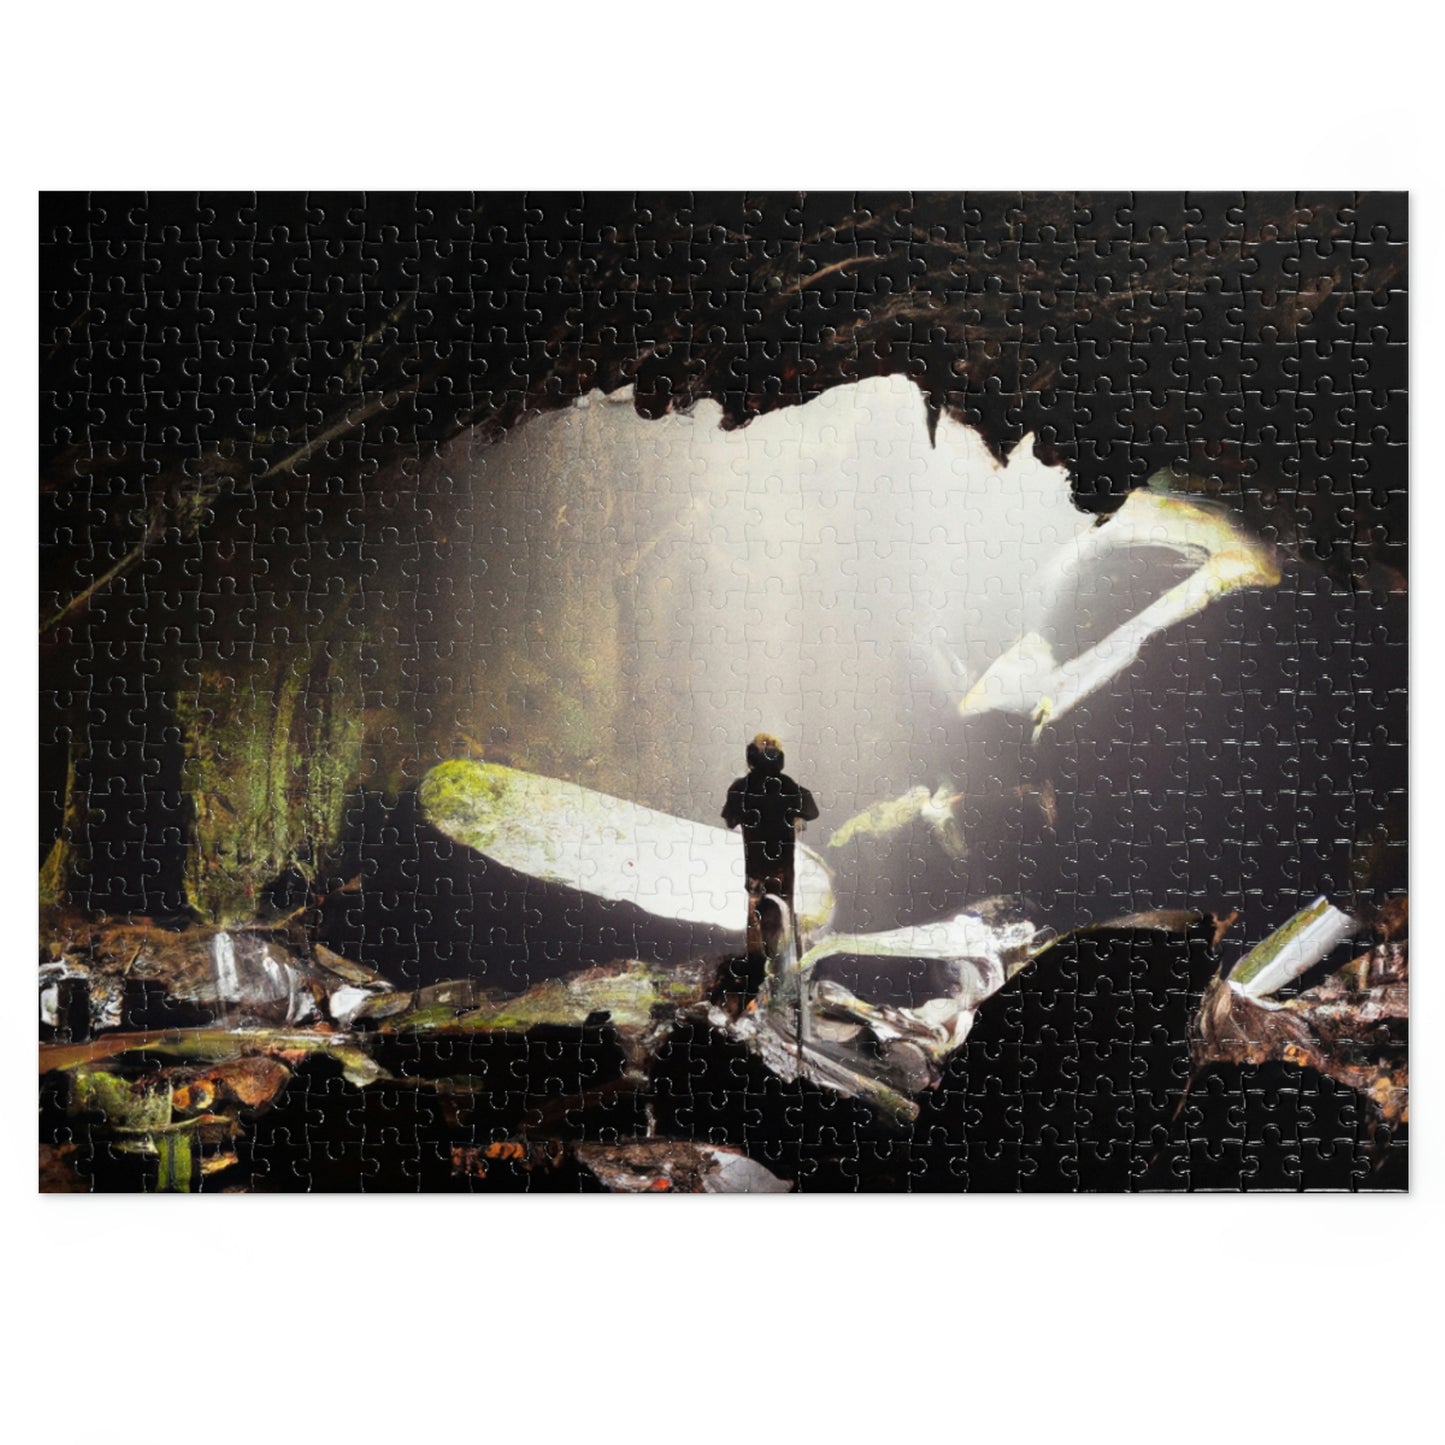 The Mystery of the Forsaken Cave - The Alien Jigsaw Puzzle